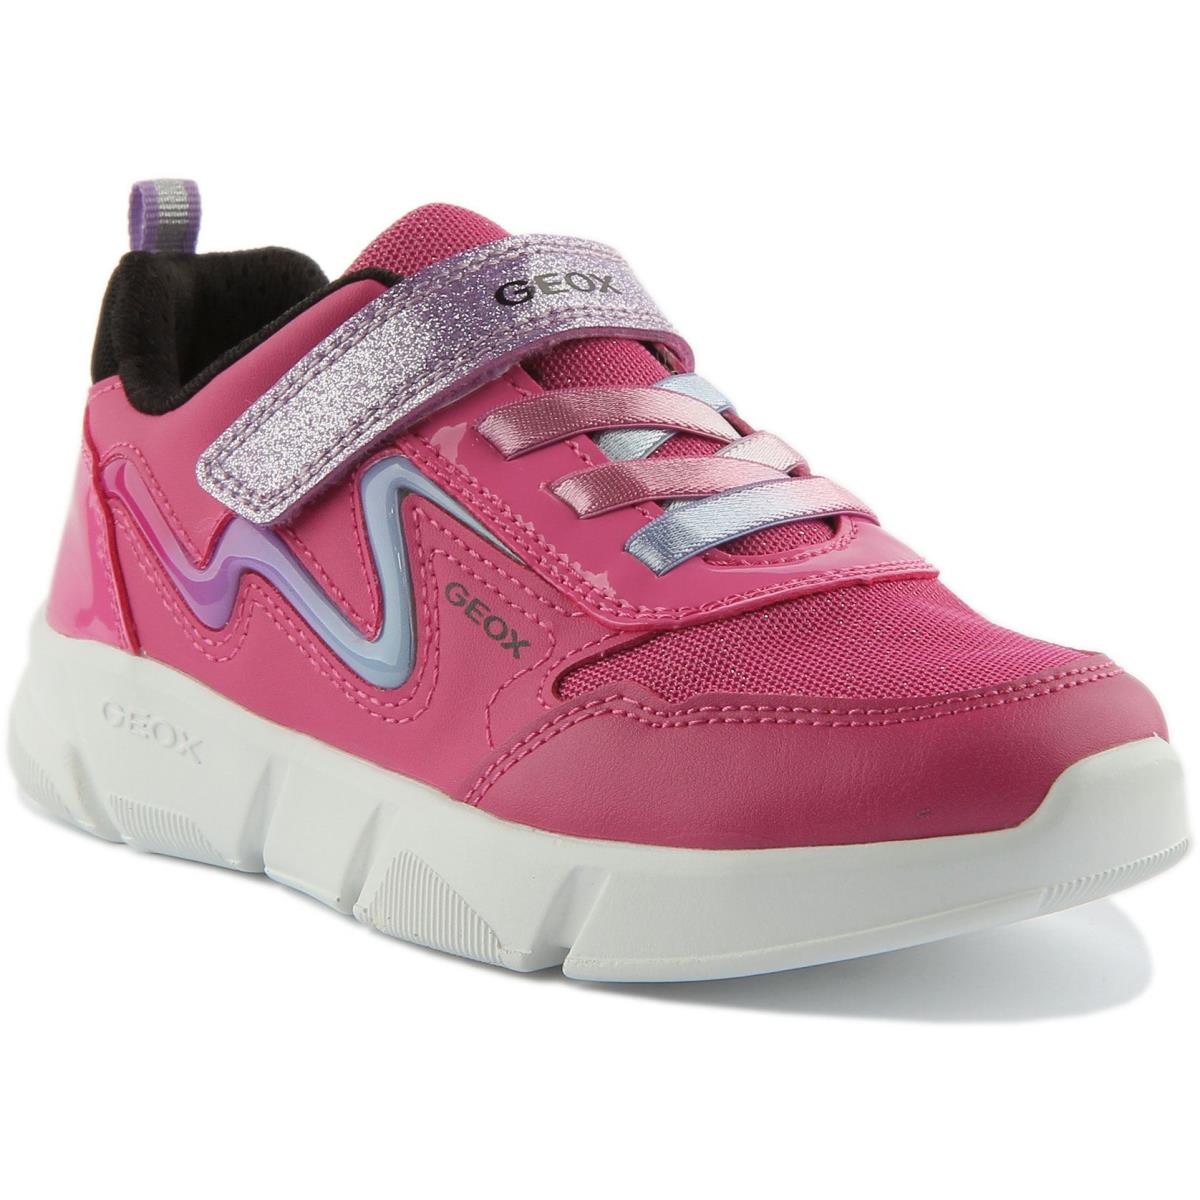 Geox J Aril Girls Single Strap Light Up Sneakers In Pink Size US 8C - 13C PINK